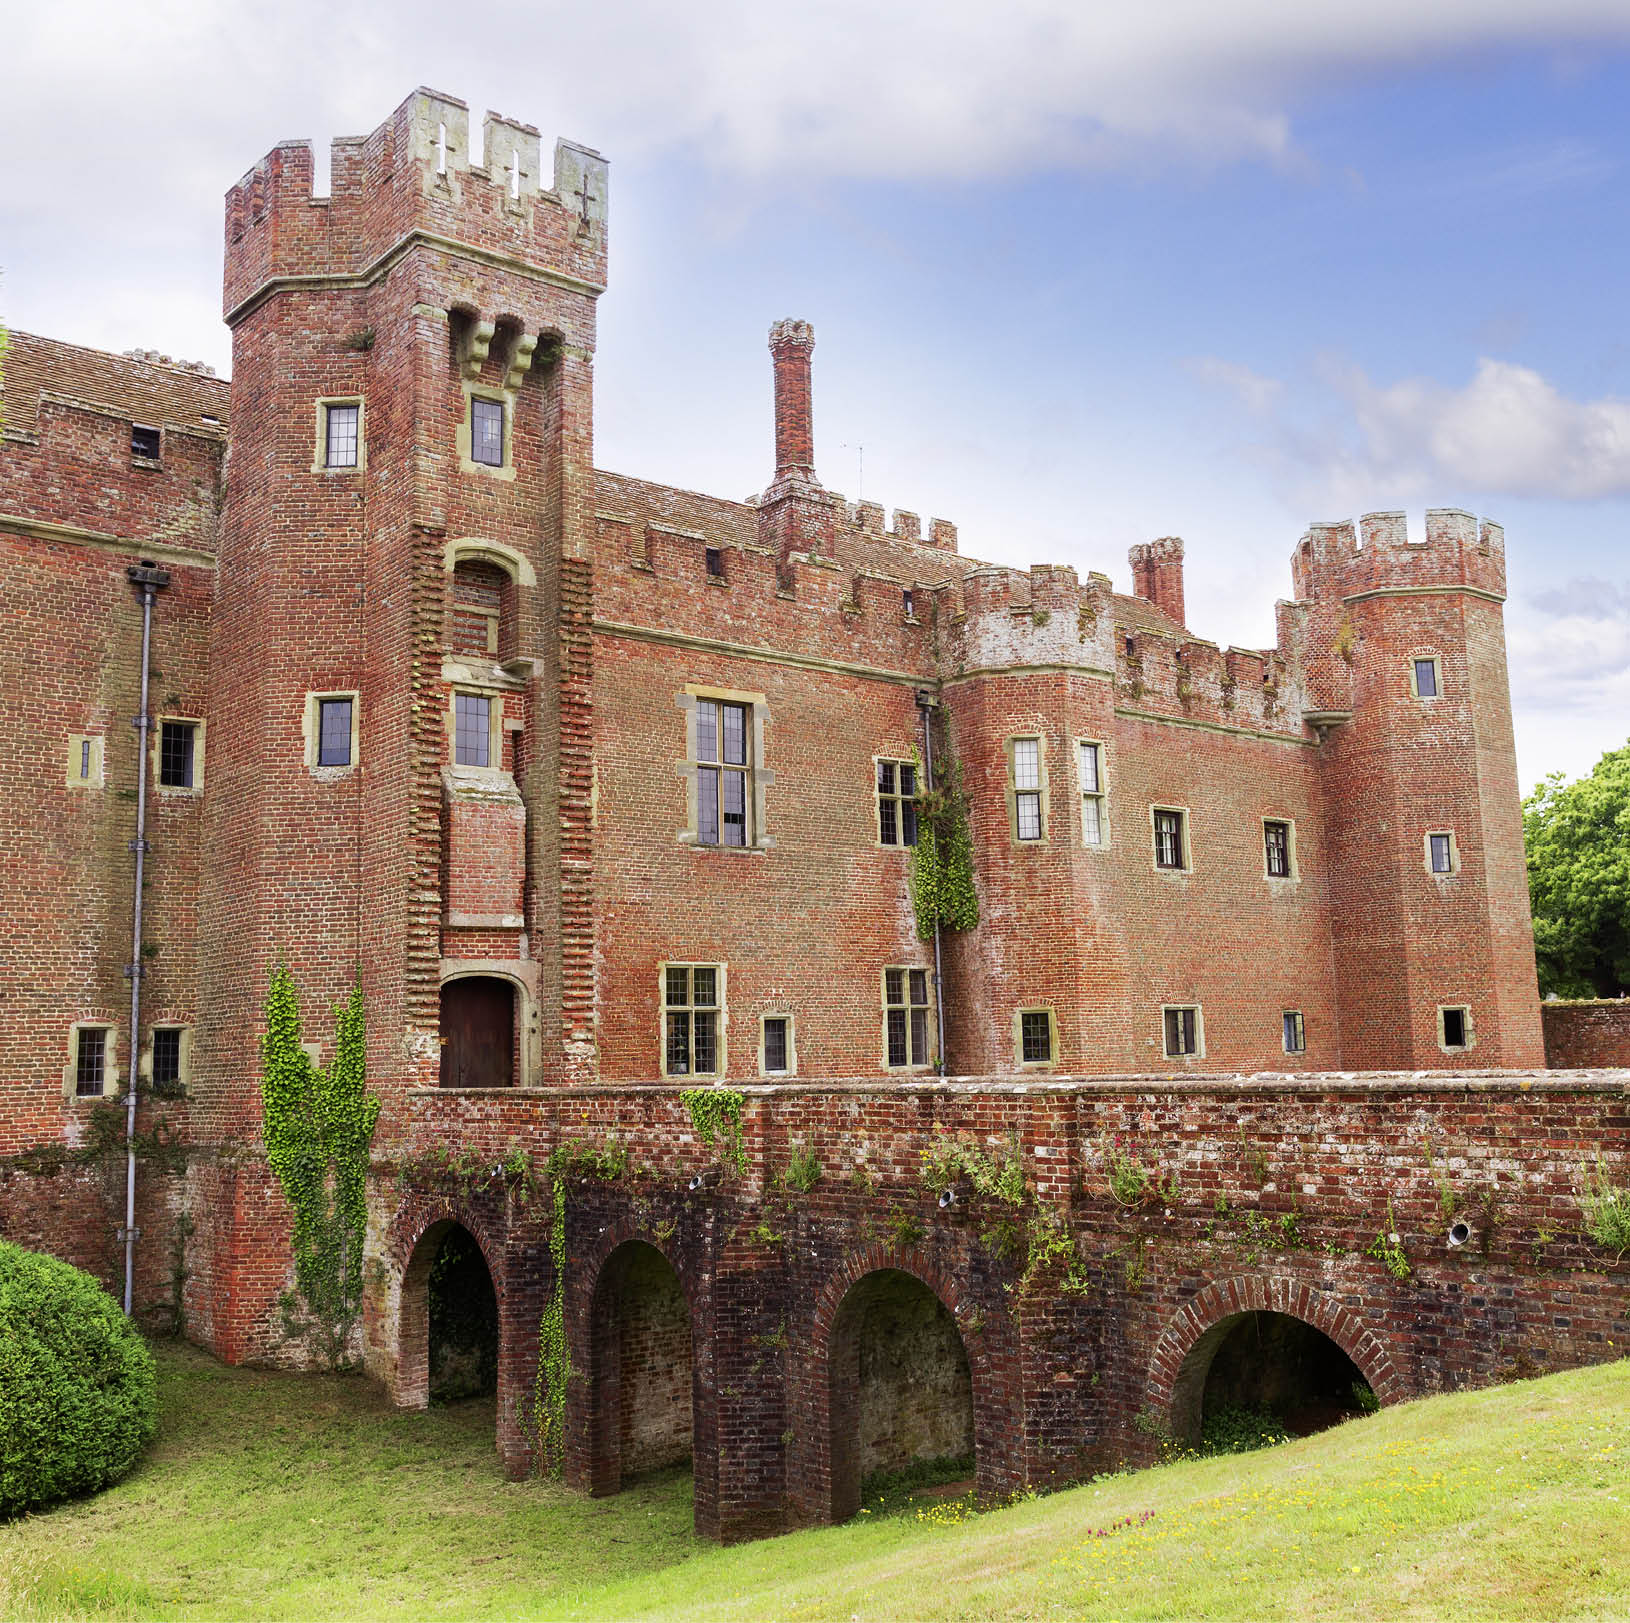 Brick Herstmonceux castle in England (East Sussex) 15th century